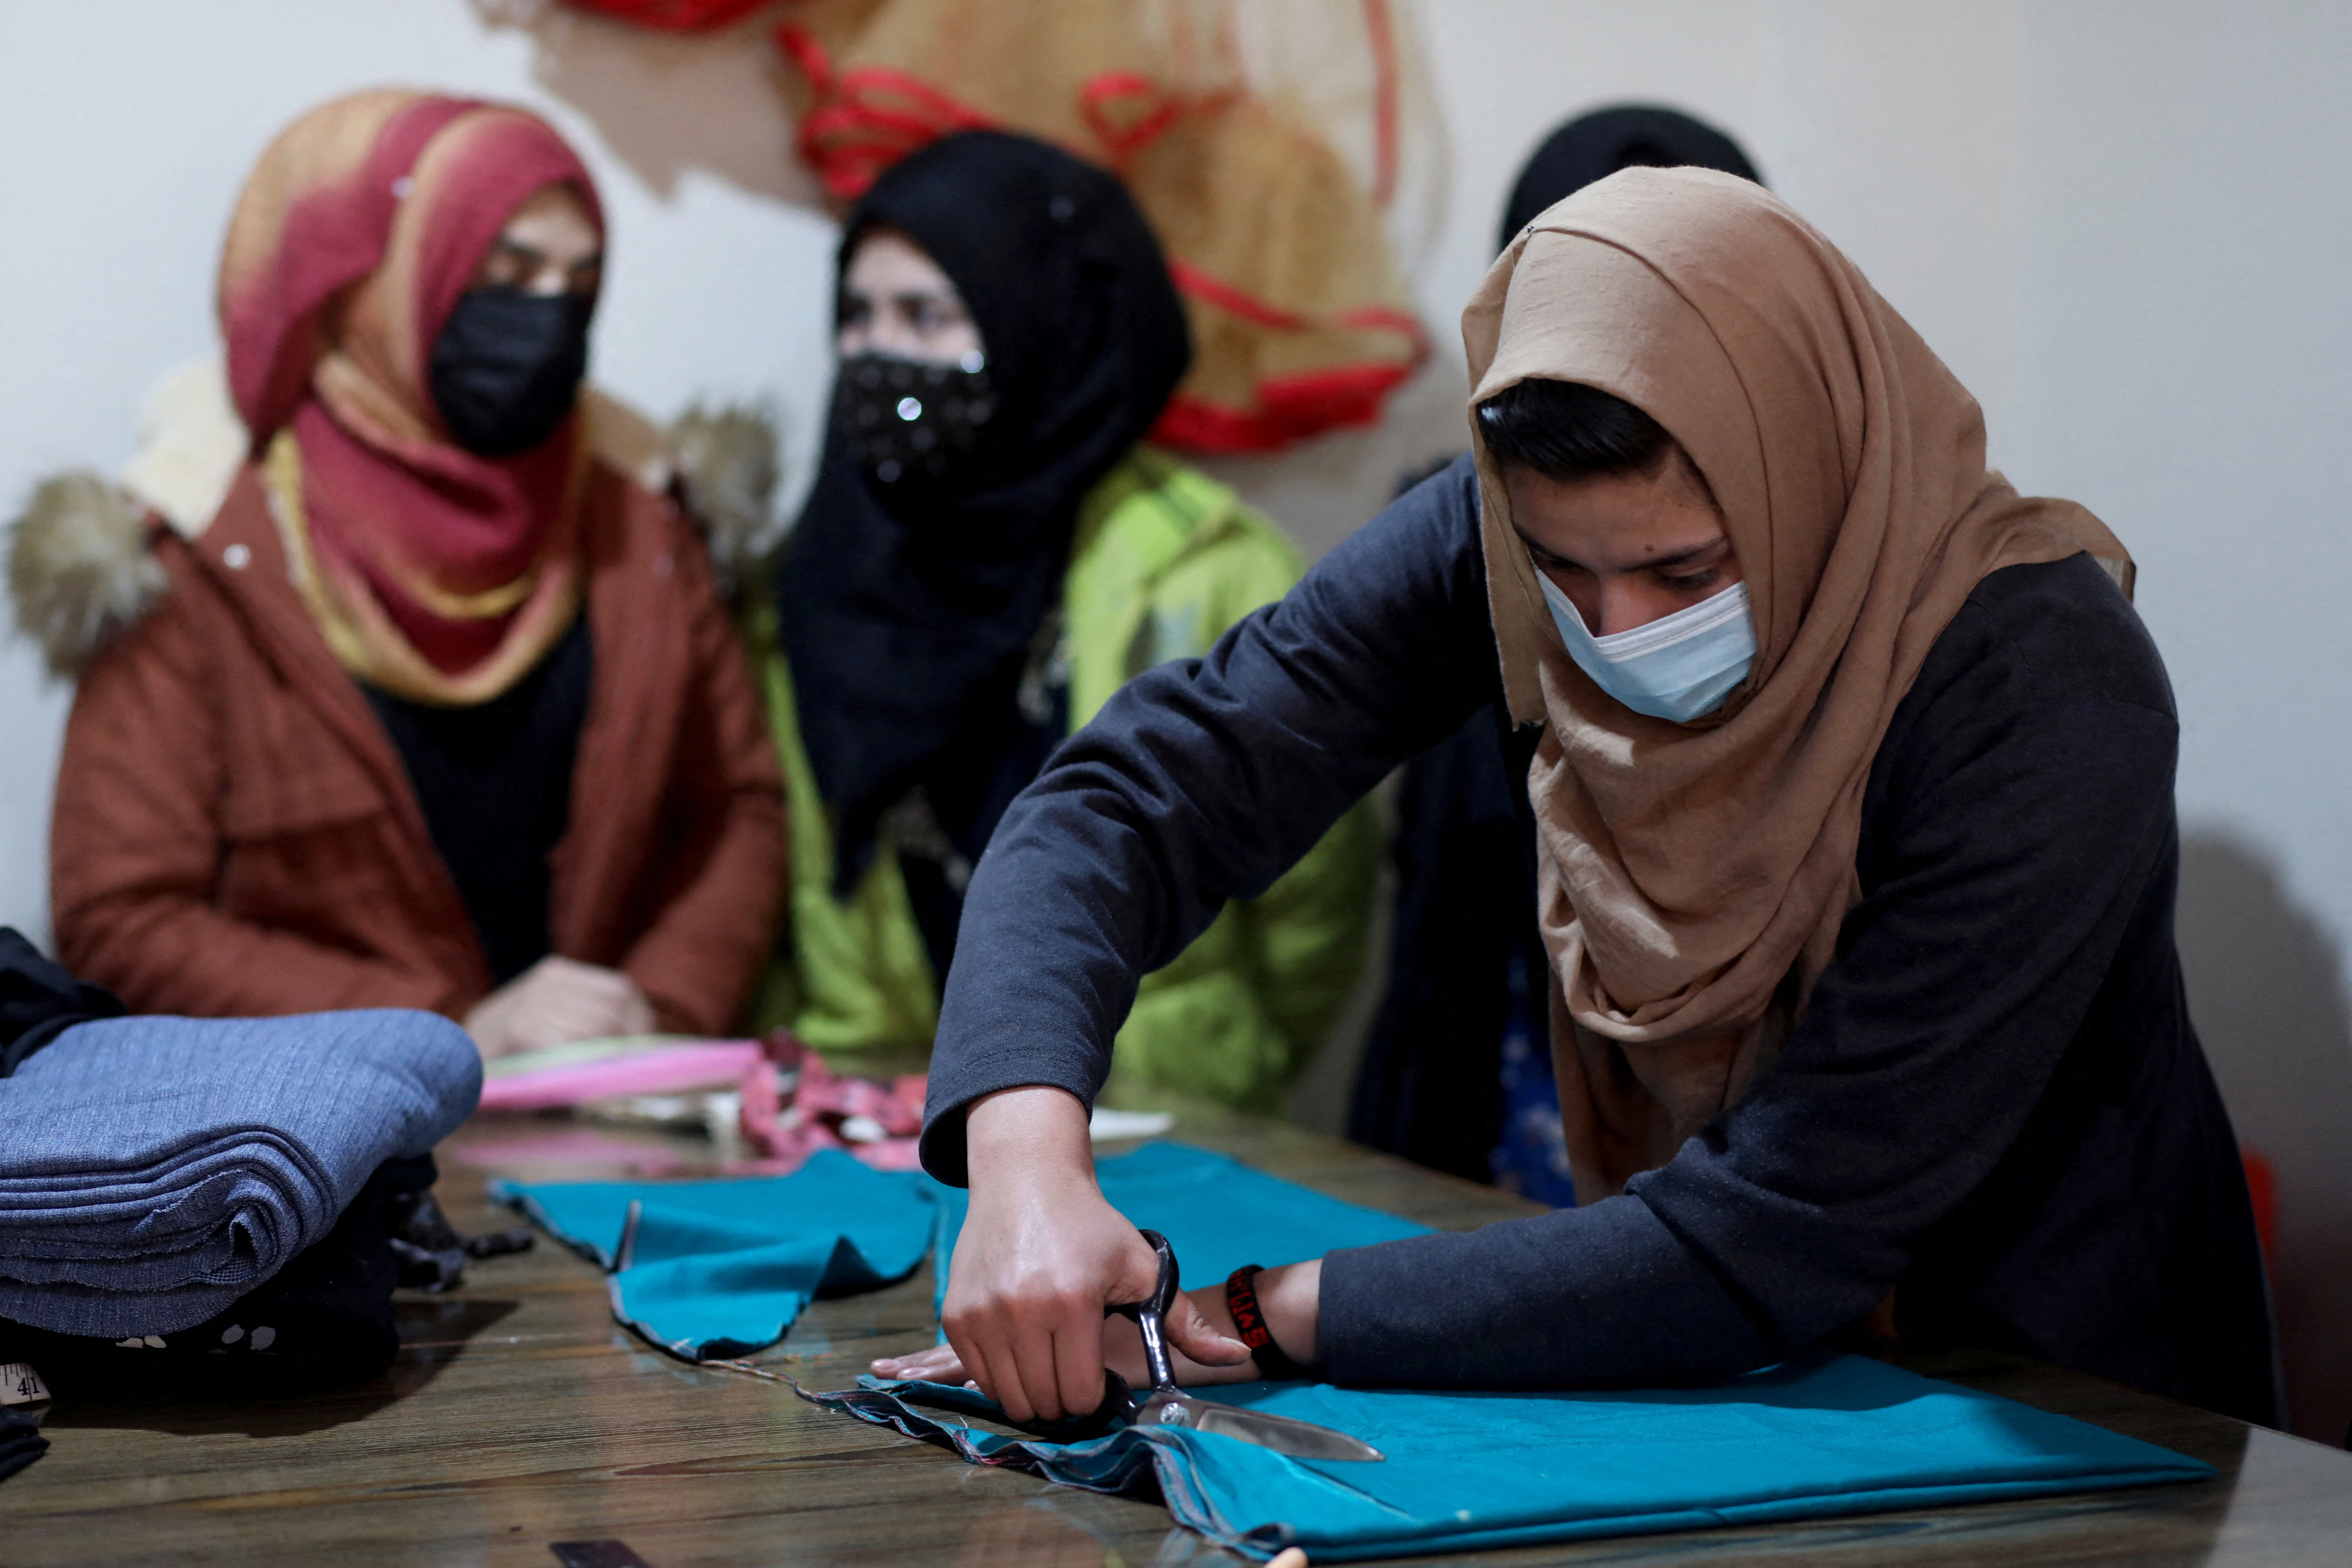 An Afghan woman cuts a fabric at a sewing workshop in Kabul